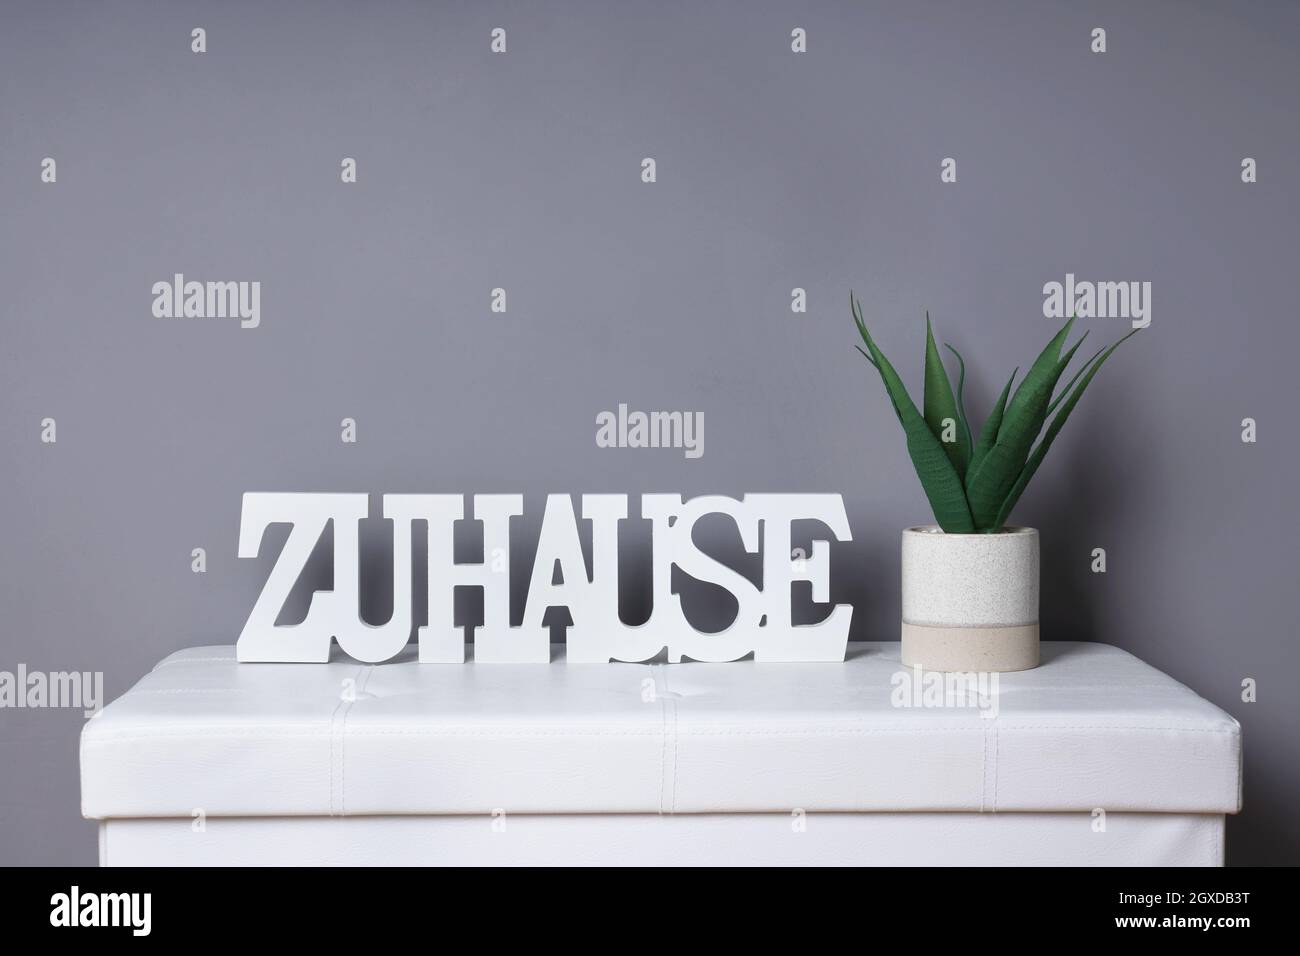 german word zuhause meaning at home as modern interior decoration next to potted plant Stock Photo